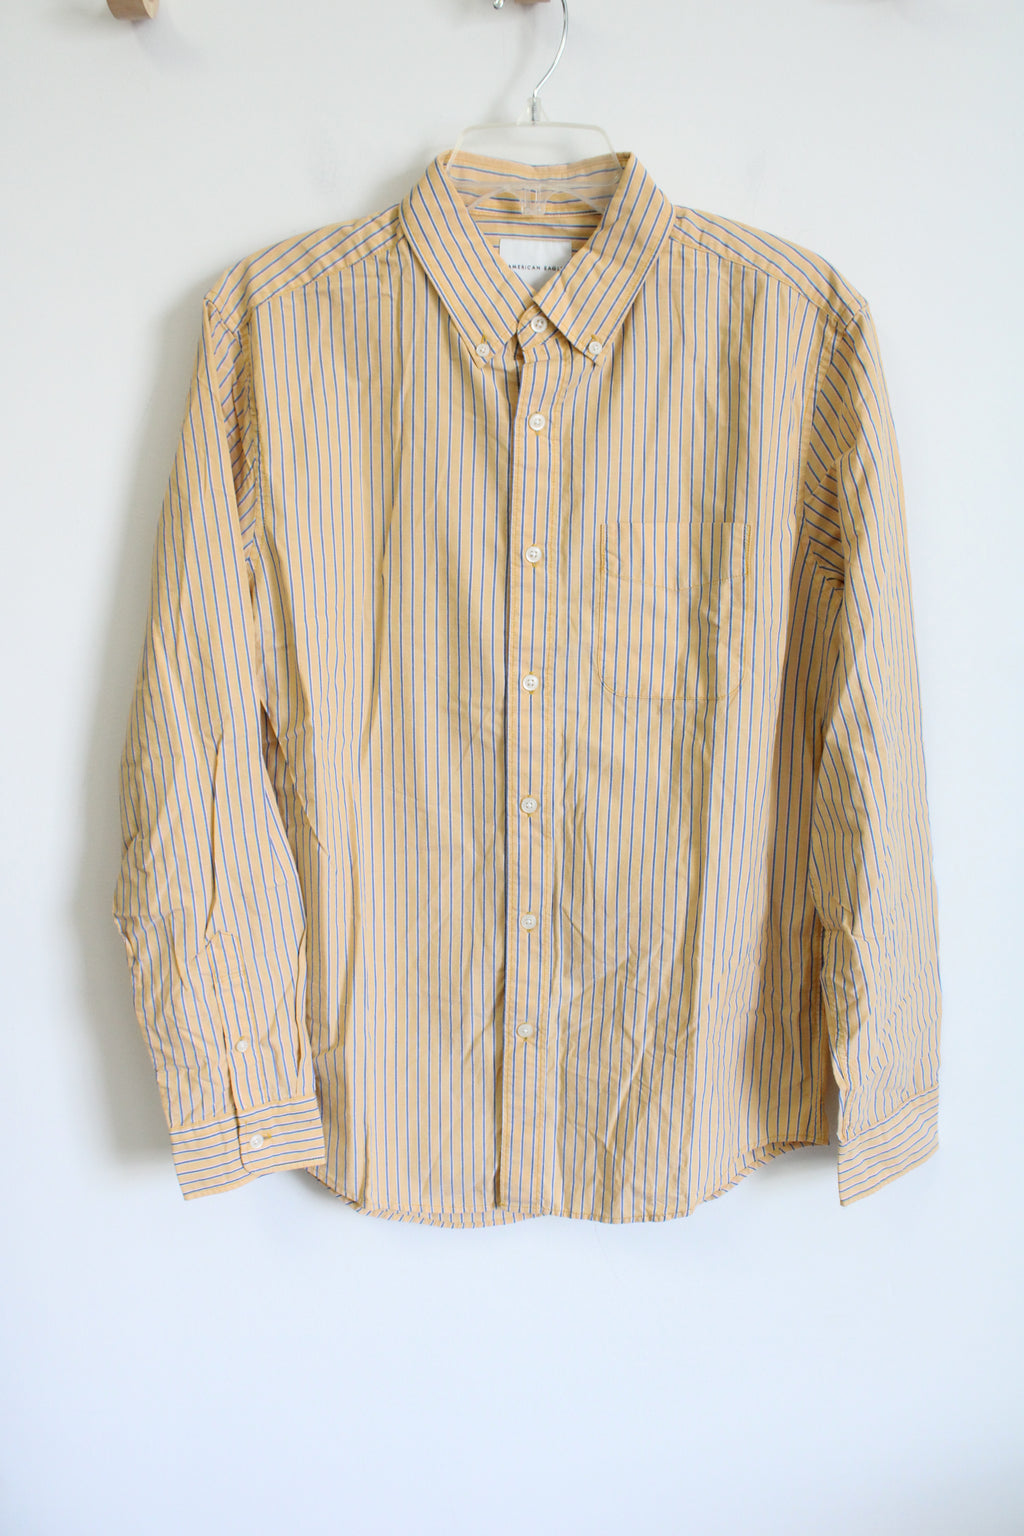 NEW American Eagle Yellow Striped Long Sleeved Button Down Shirt | M